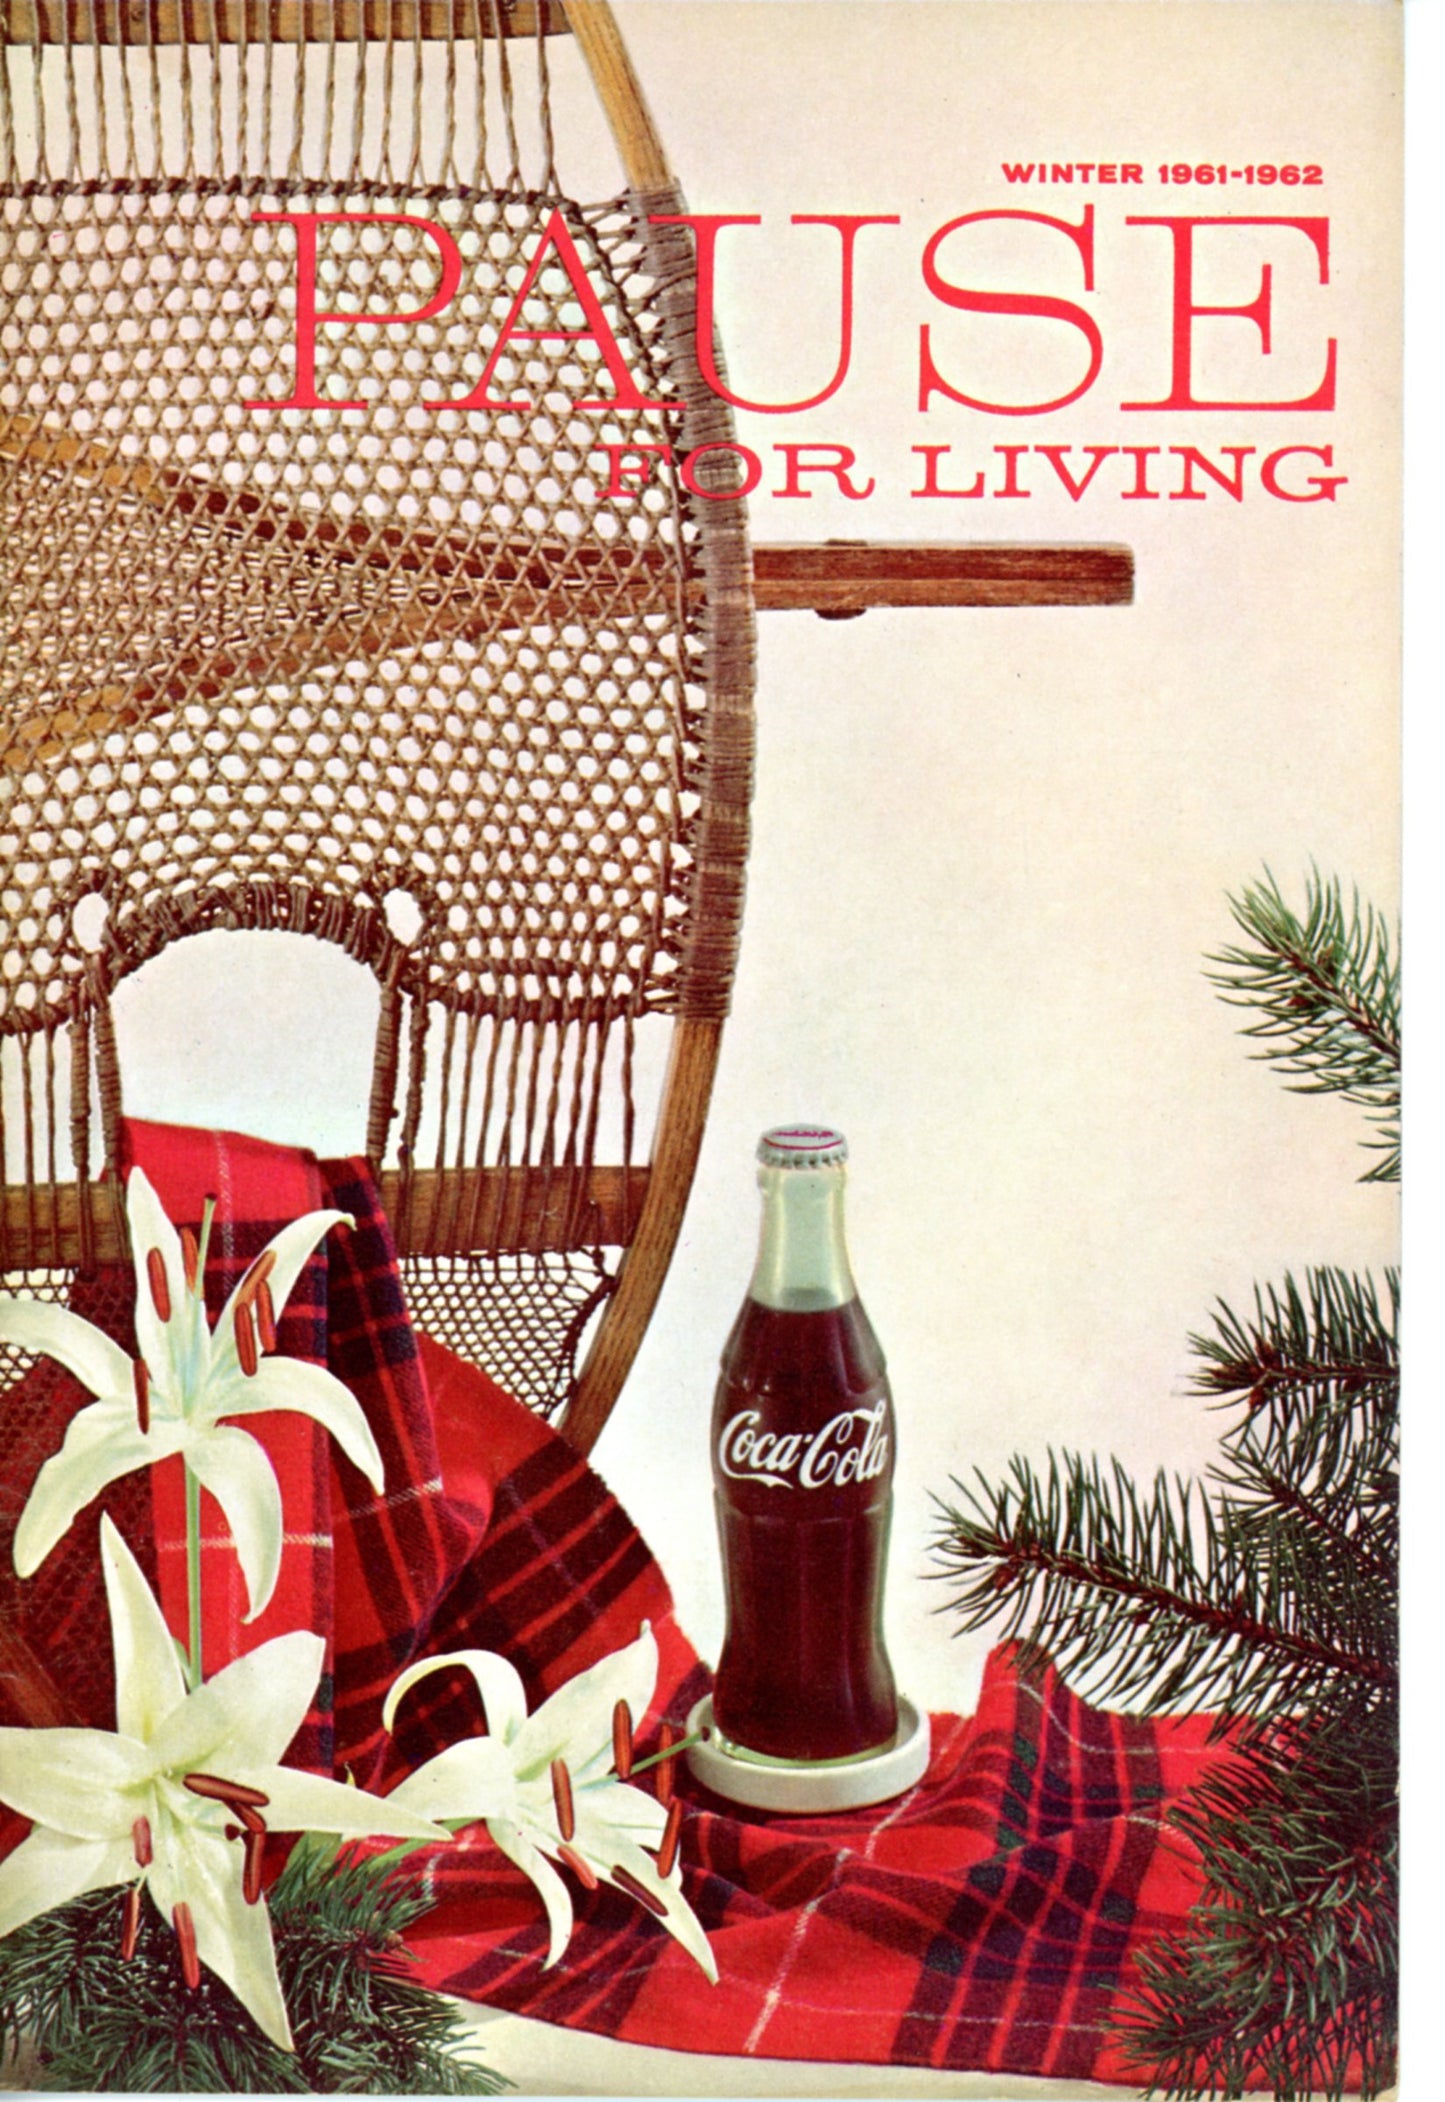 PAUSE FOR LIVING Seasonal Coca Cola Booklets from 1961 Full Year | Set of Four